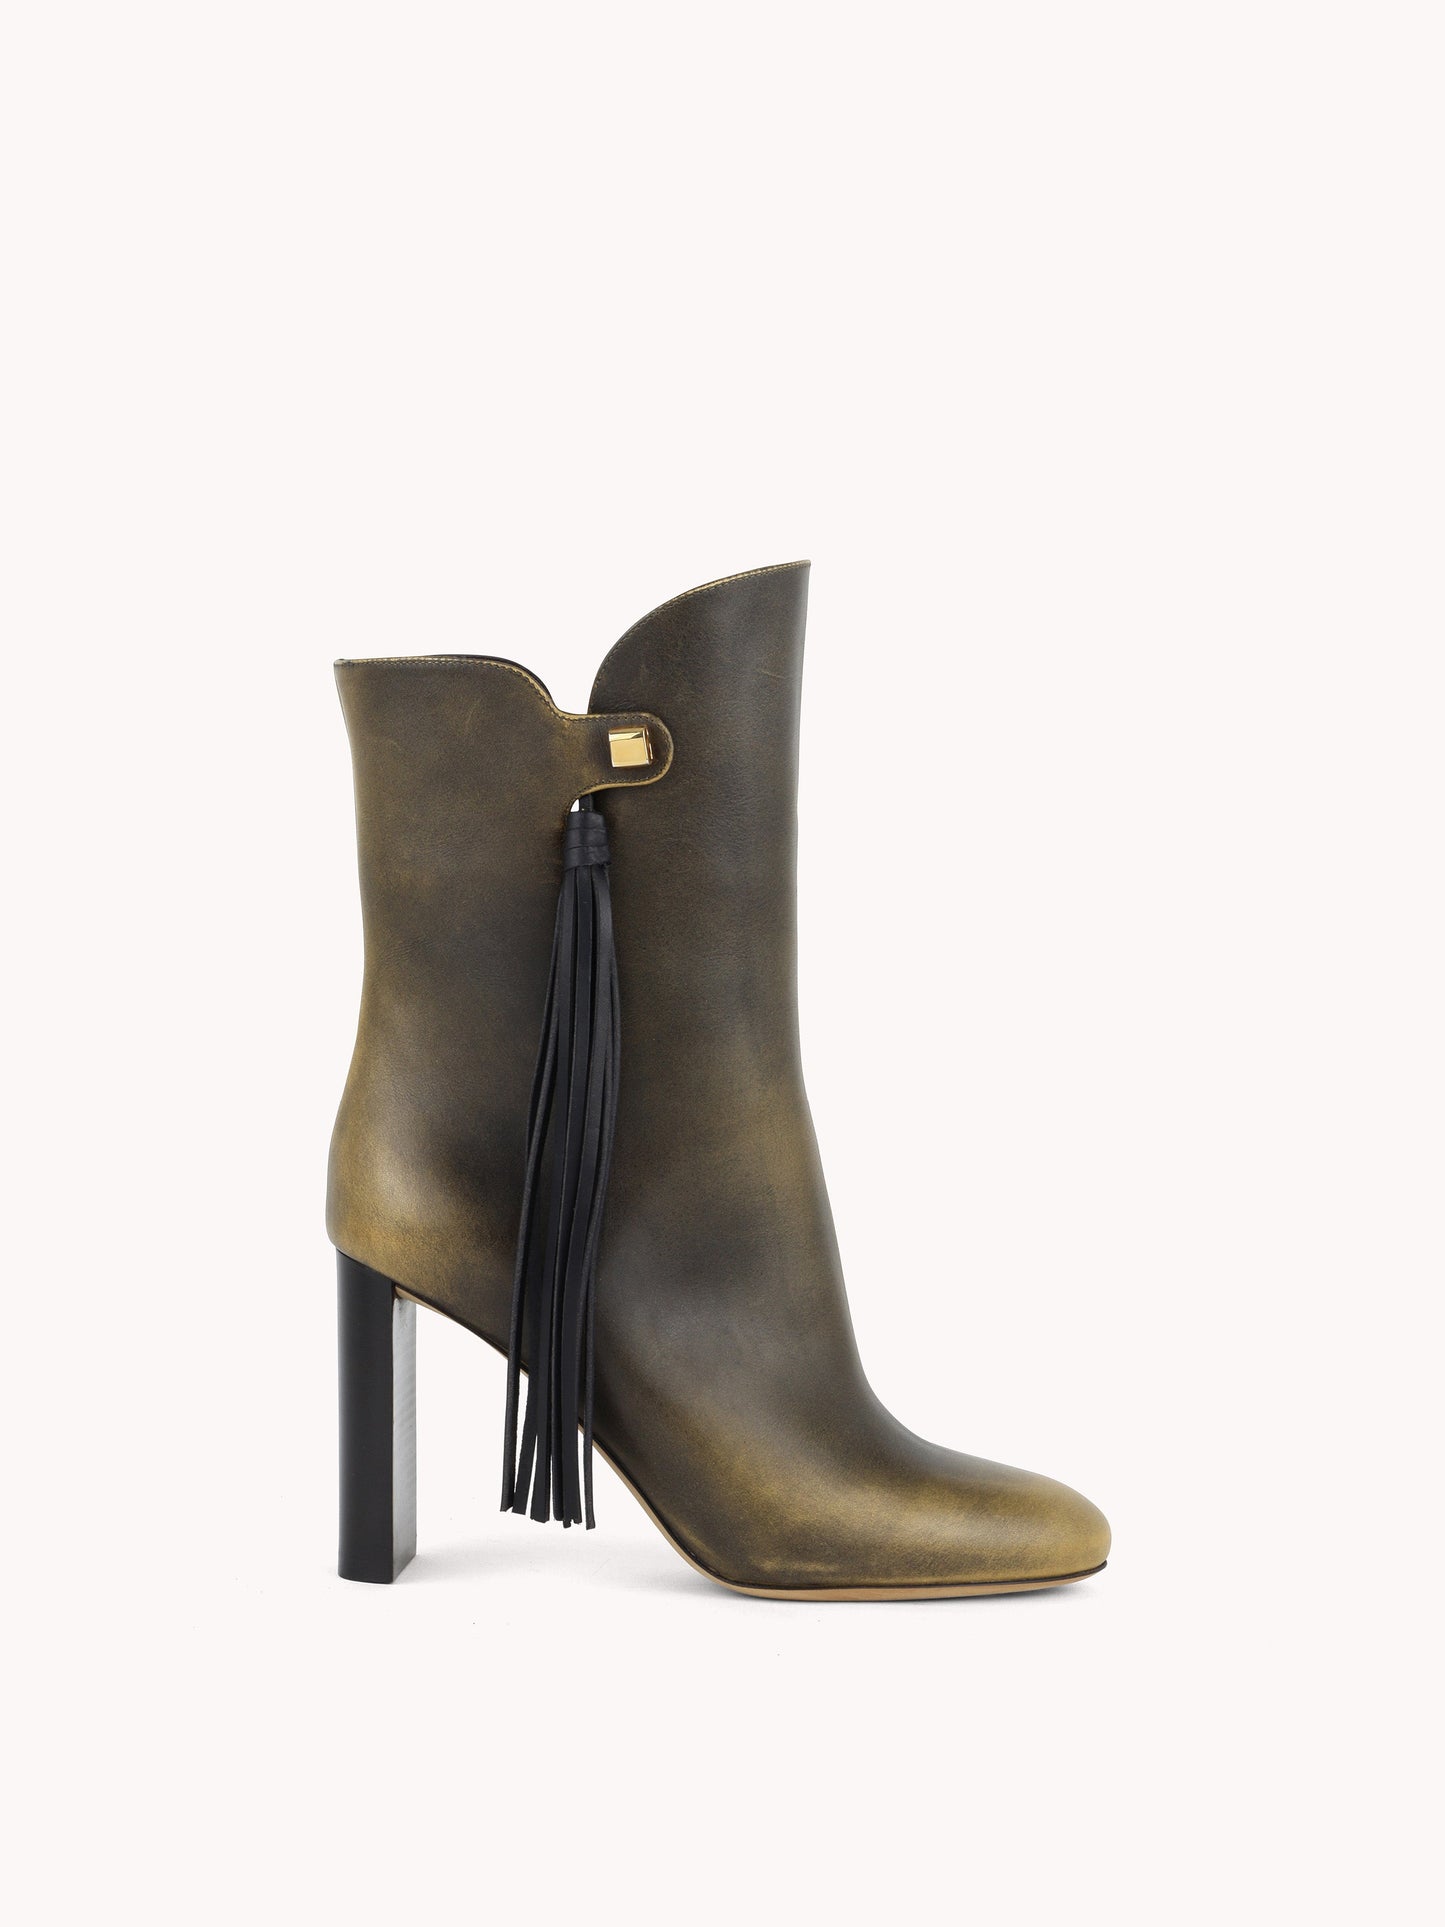 sophisticated golden brown leather ankle boots with an equestrian strap skorpios